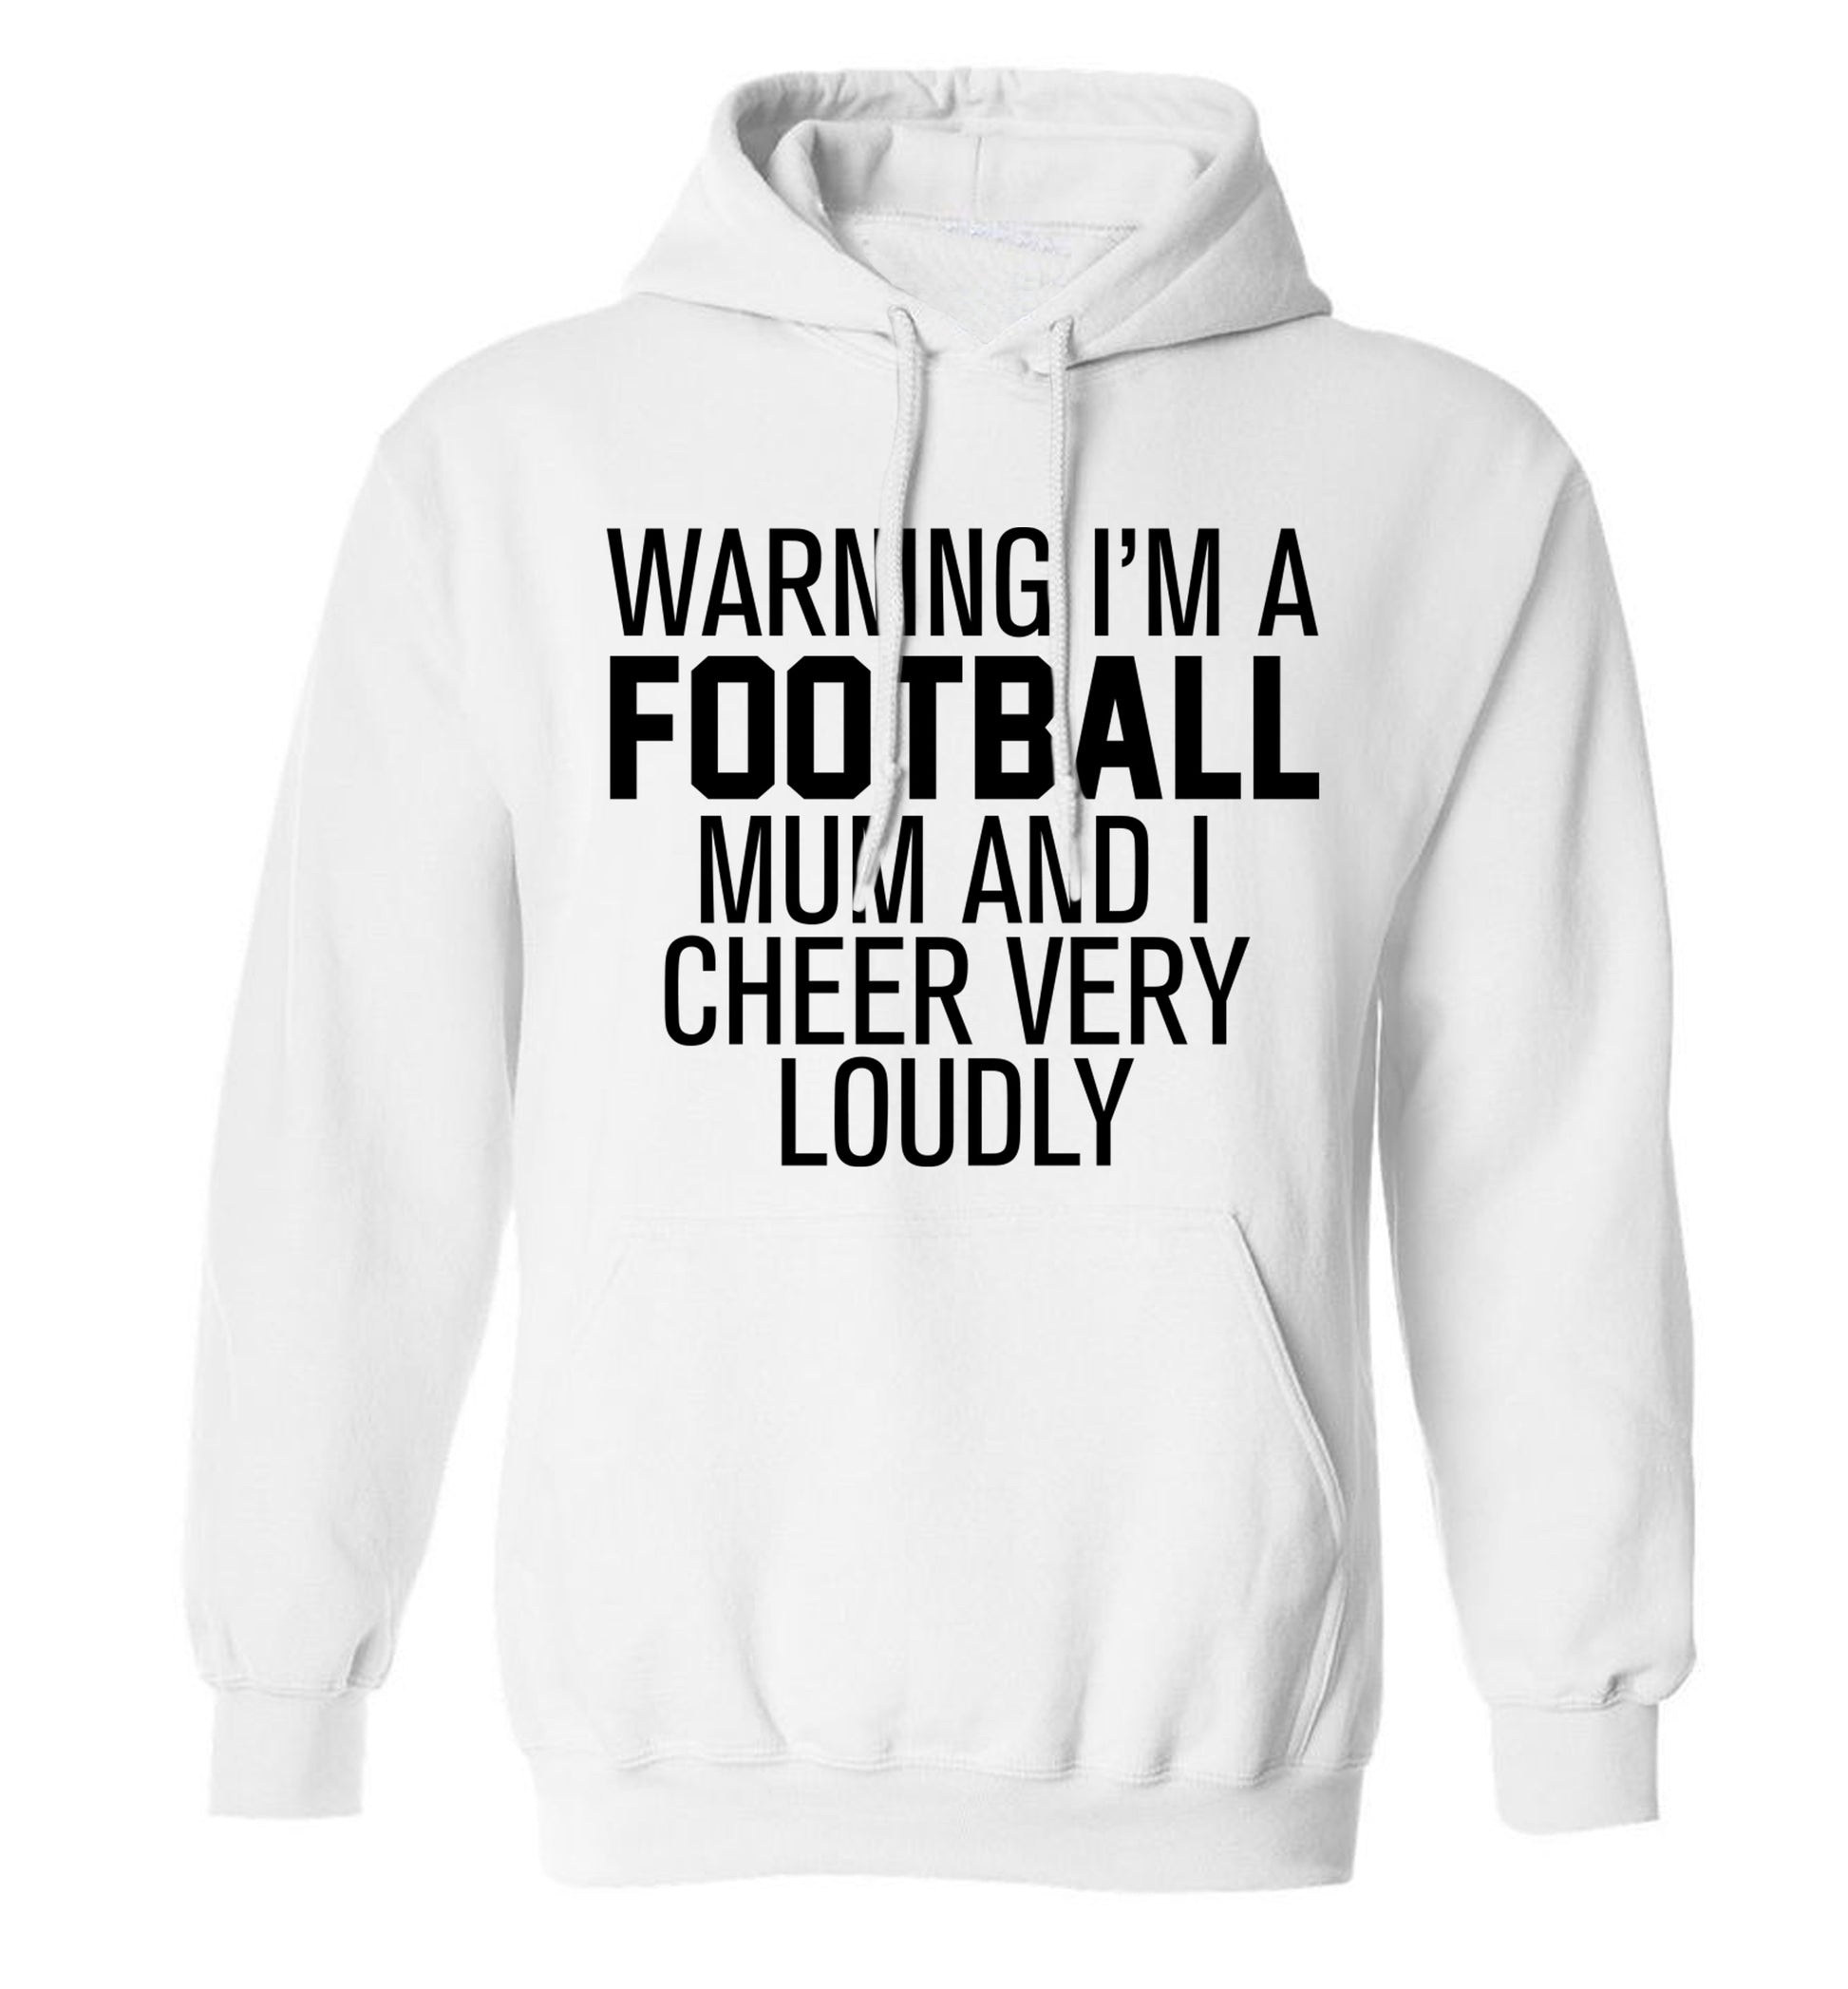 Warning I'm a football mum and I cheer very loudly adults unisexwhite hoodie 2XL